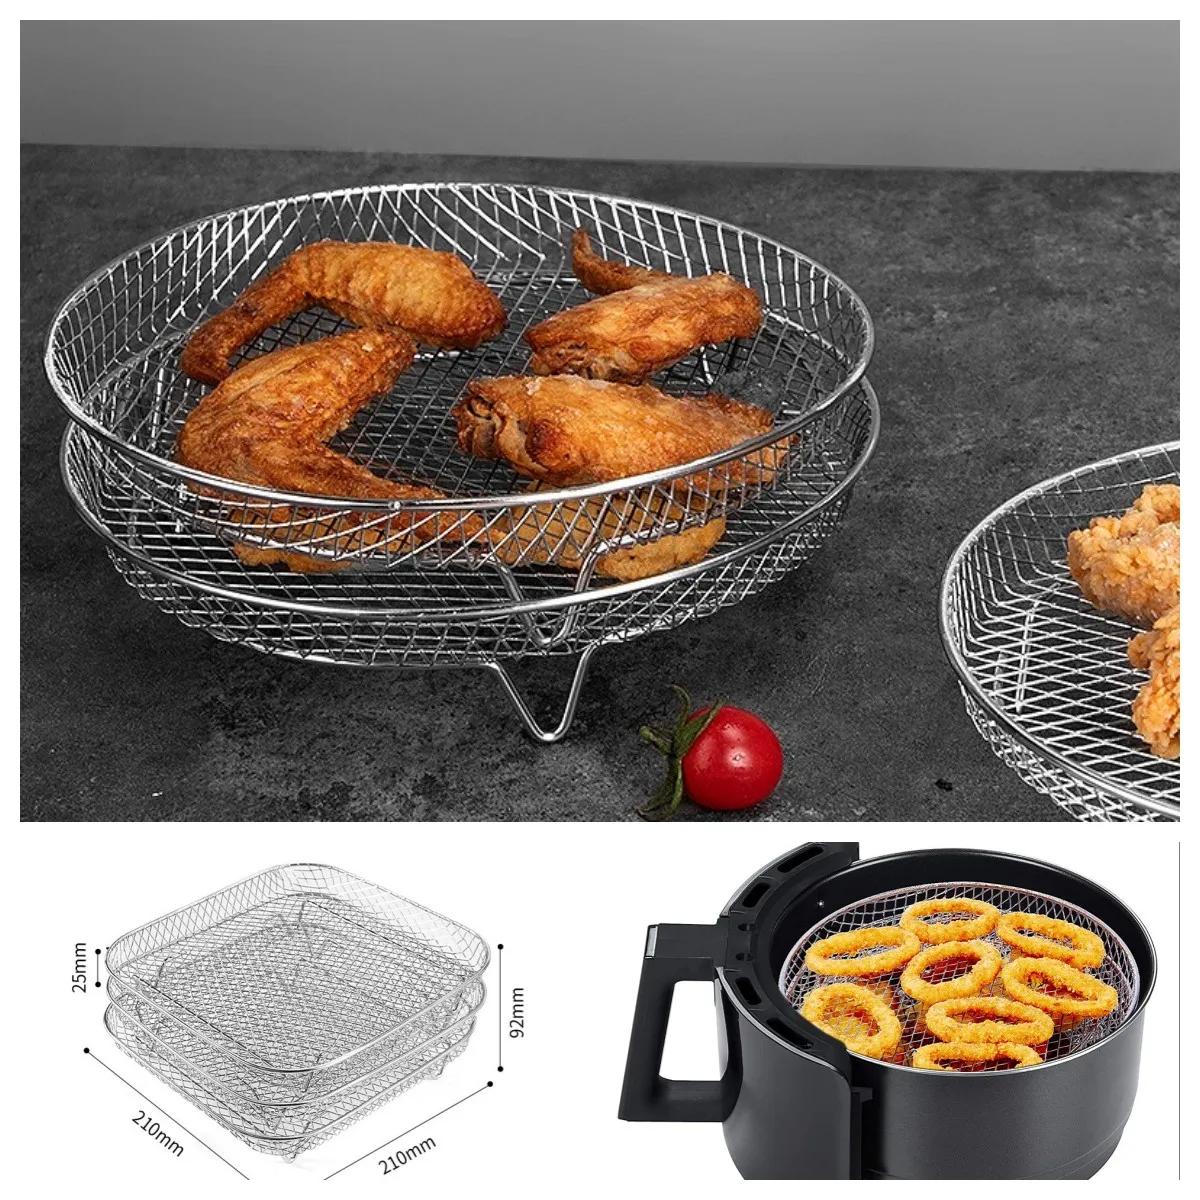 3-layers Air Fryer Rack Stainless Steel Stackable Grid Grilling Drying Basket  Air Fryer Accessories Steam For Air Fryer Tray - AliExpress